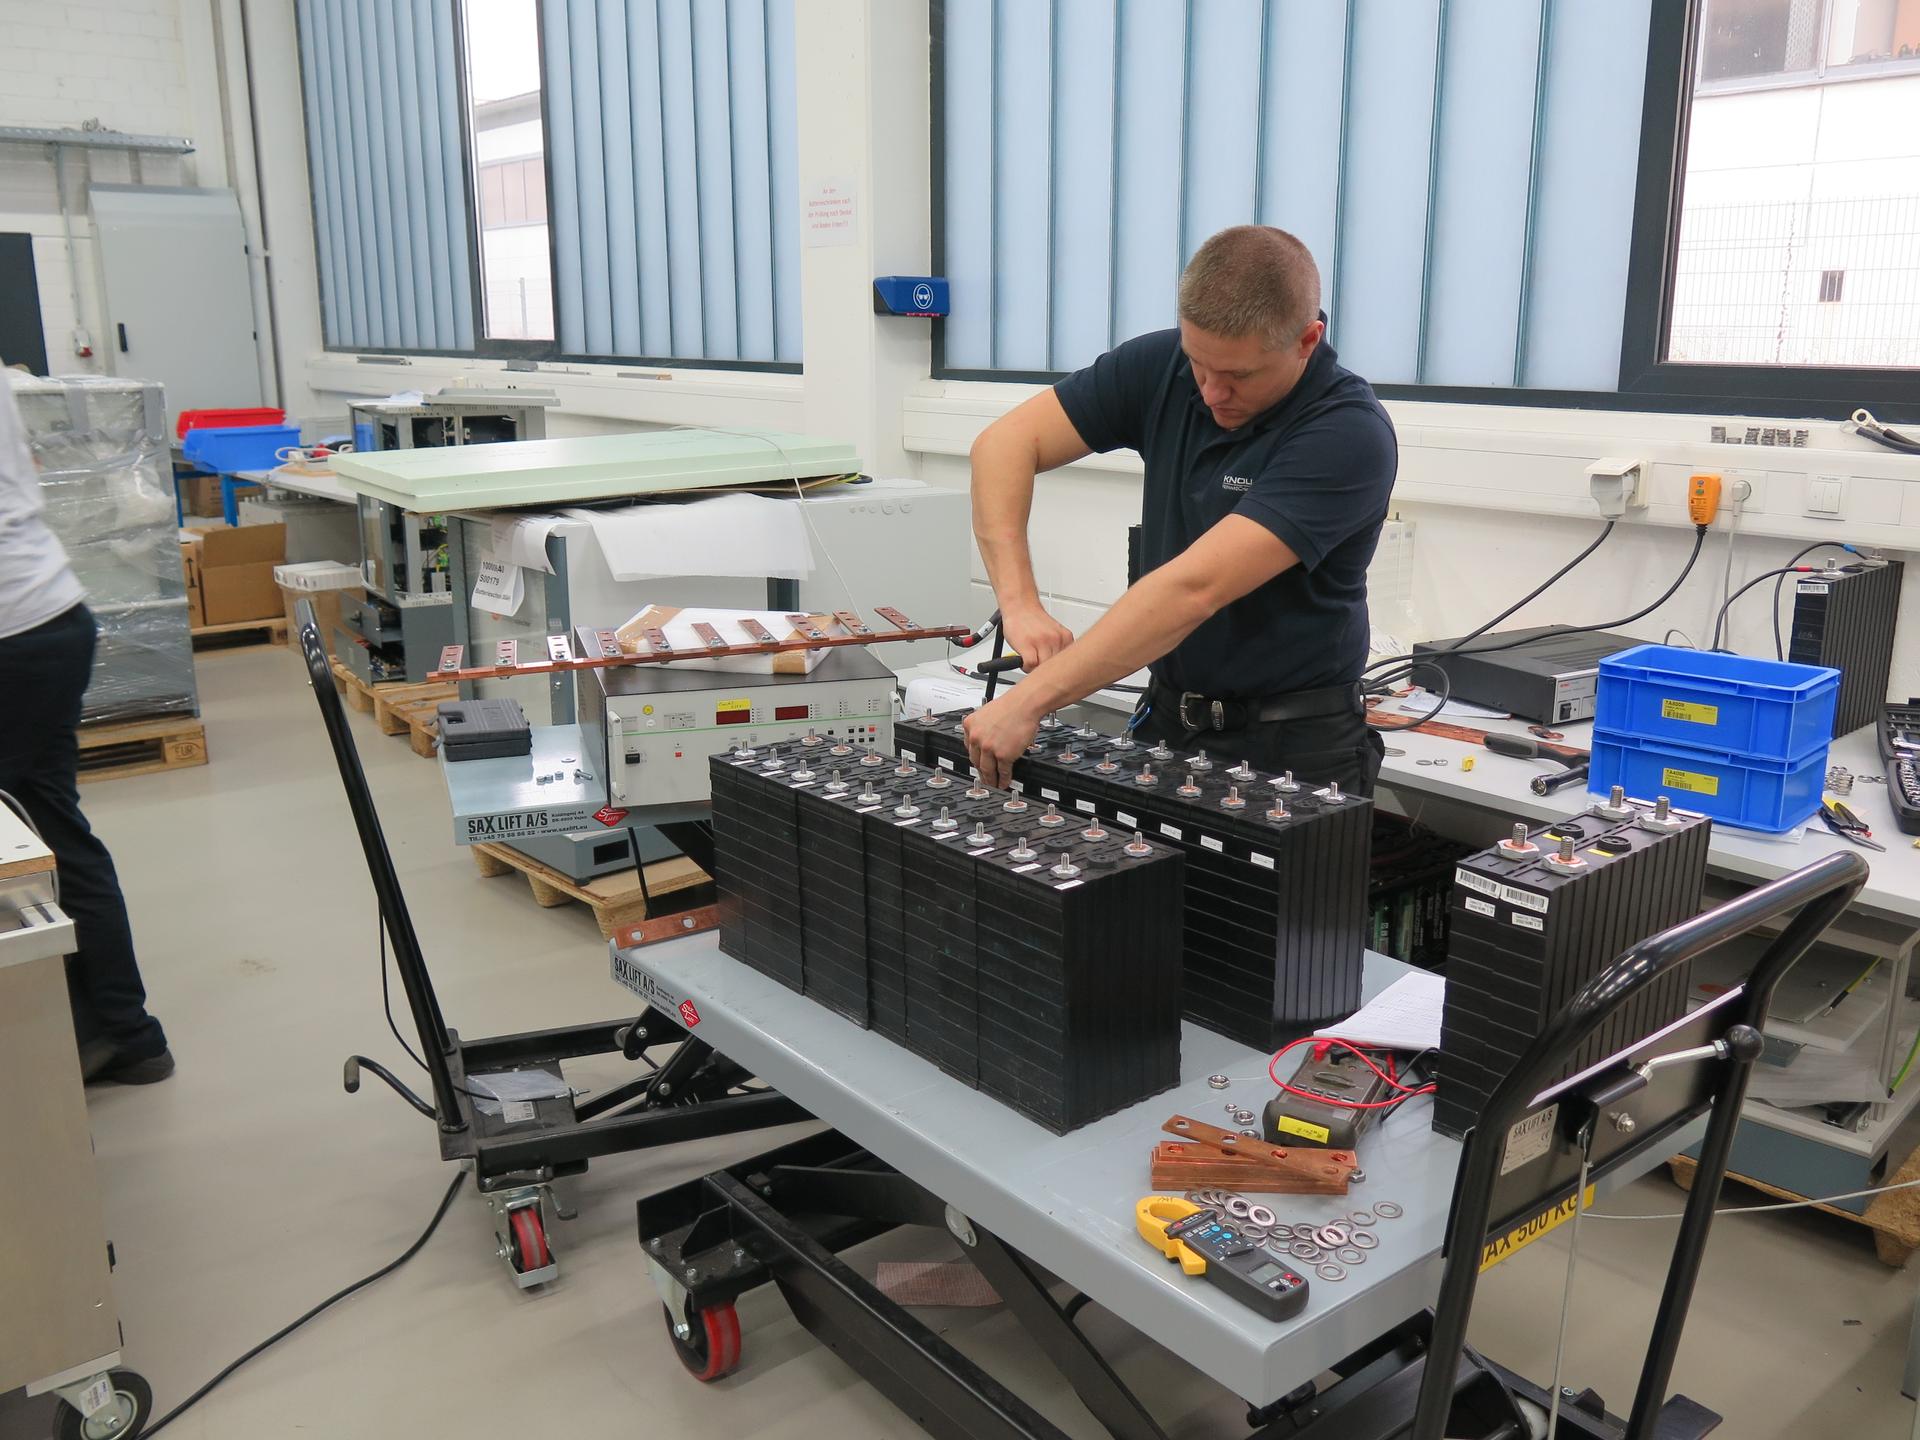 A technician checks a bank of lithium-iron-phosphate batteries for installation in a Sonnenspeicher system at he ASD factory in Umkirch, Germany. Wolfram Walter says his company's specially-designed electronics and software overcomes many of the limitatio